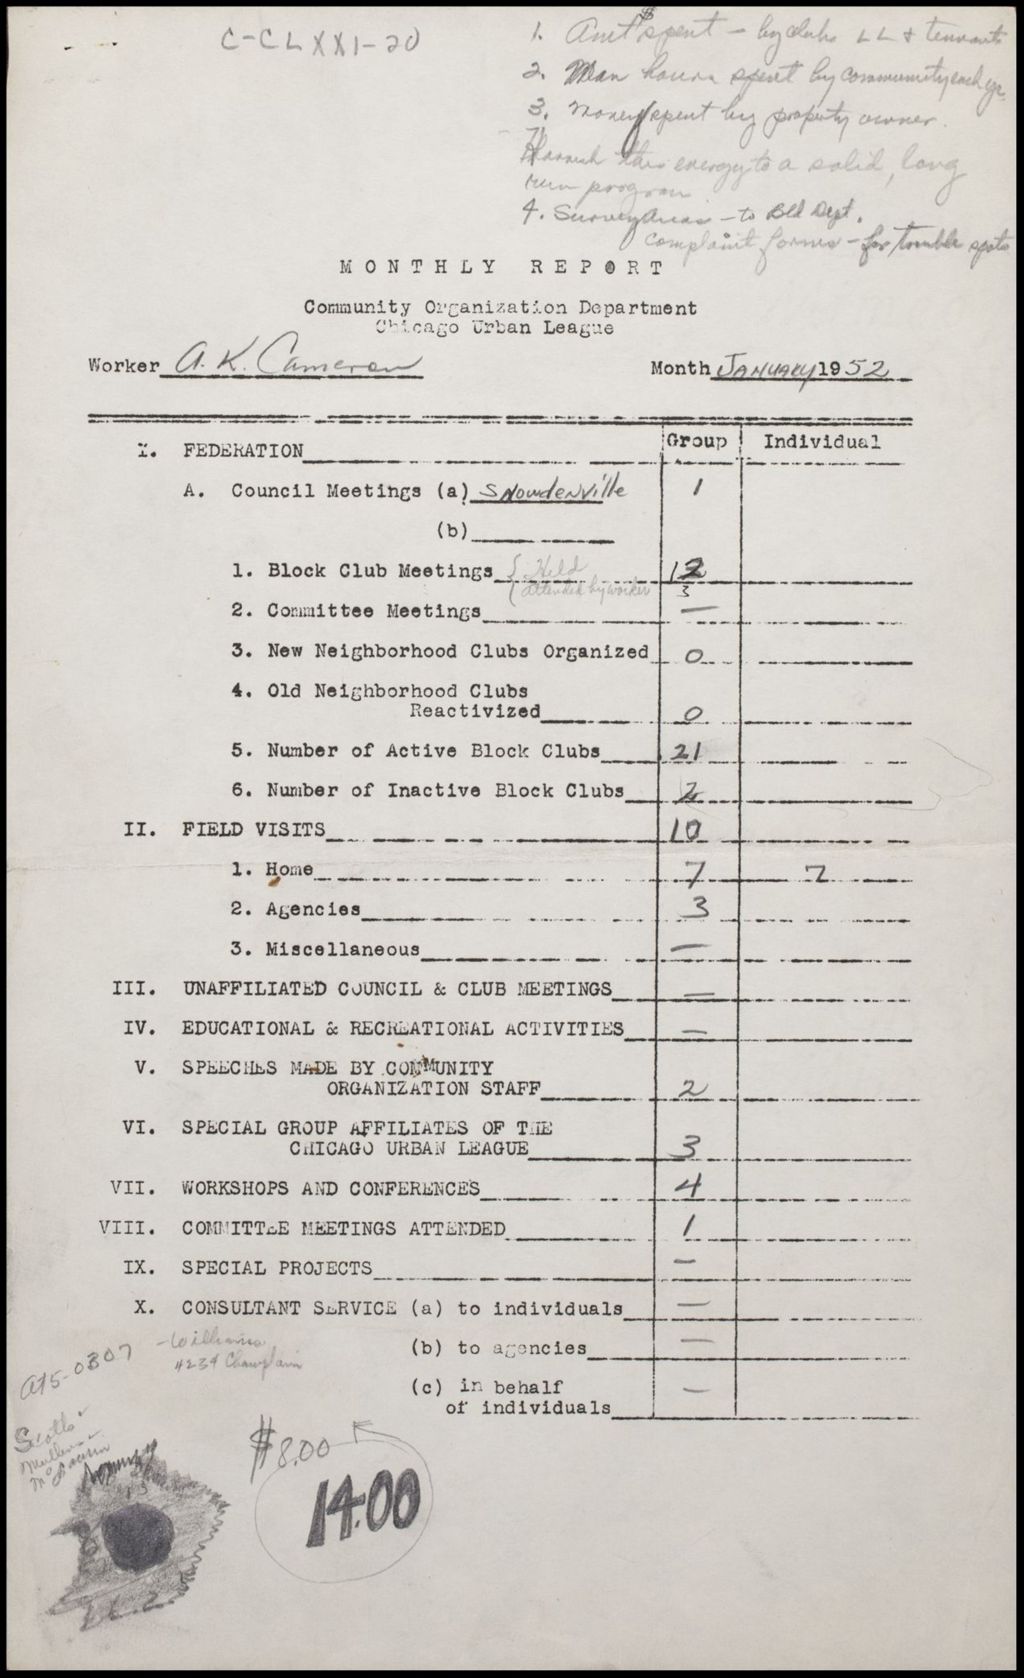 Community Workers' Monthly Reports, 1949-1952 (Folder II-2175)